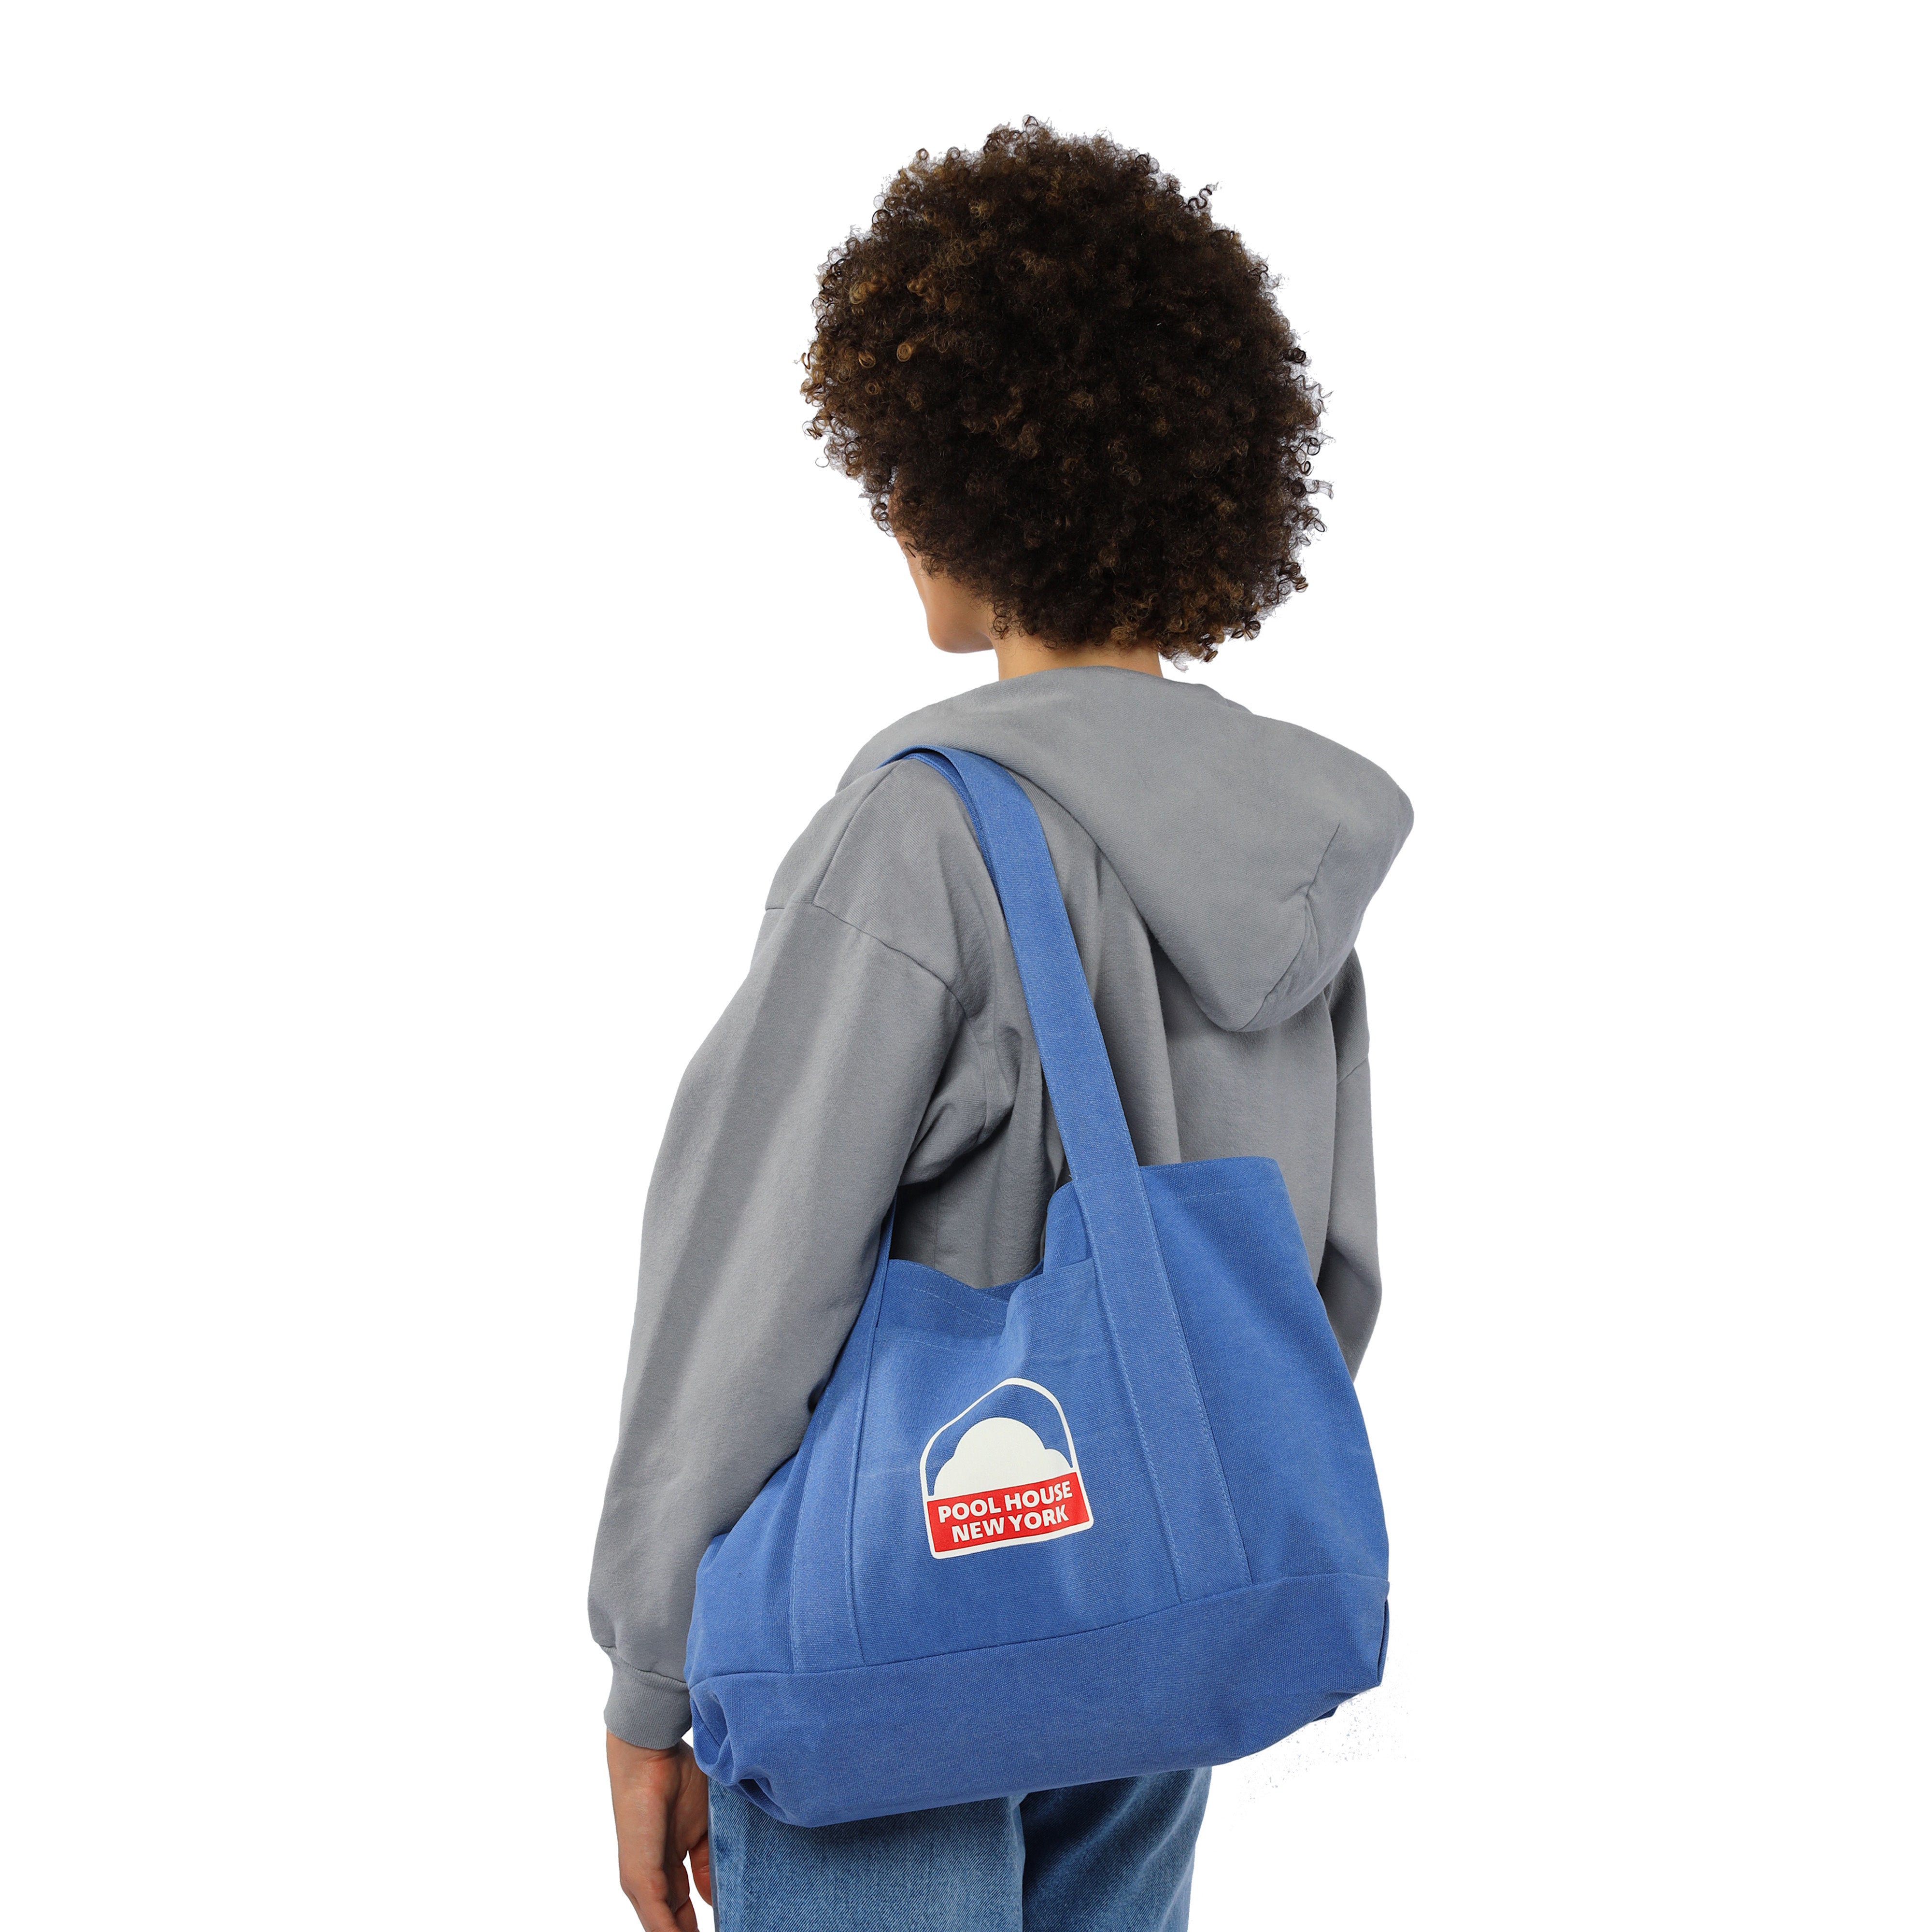 The Baxter Tote Periwinkle Blue 